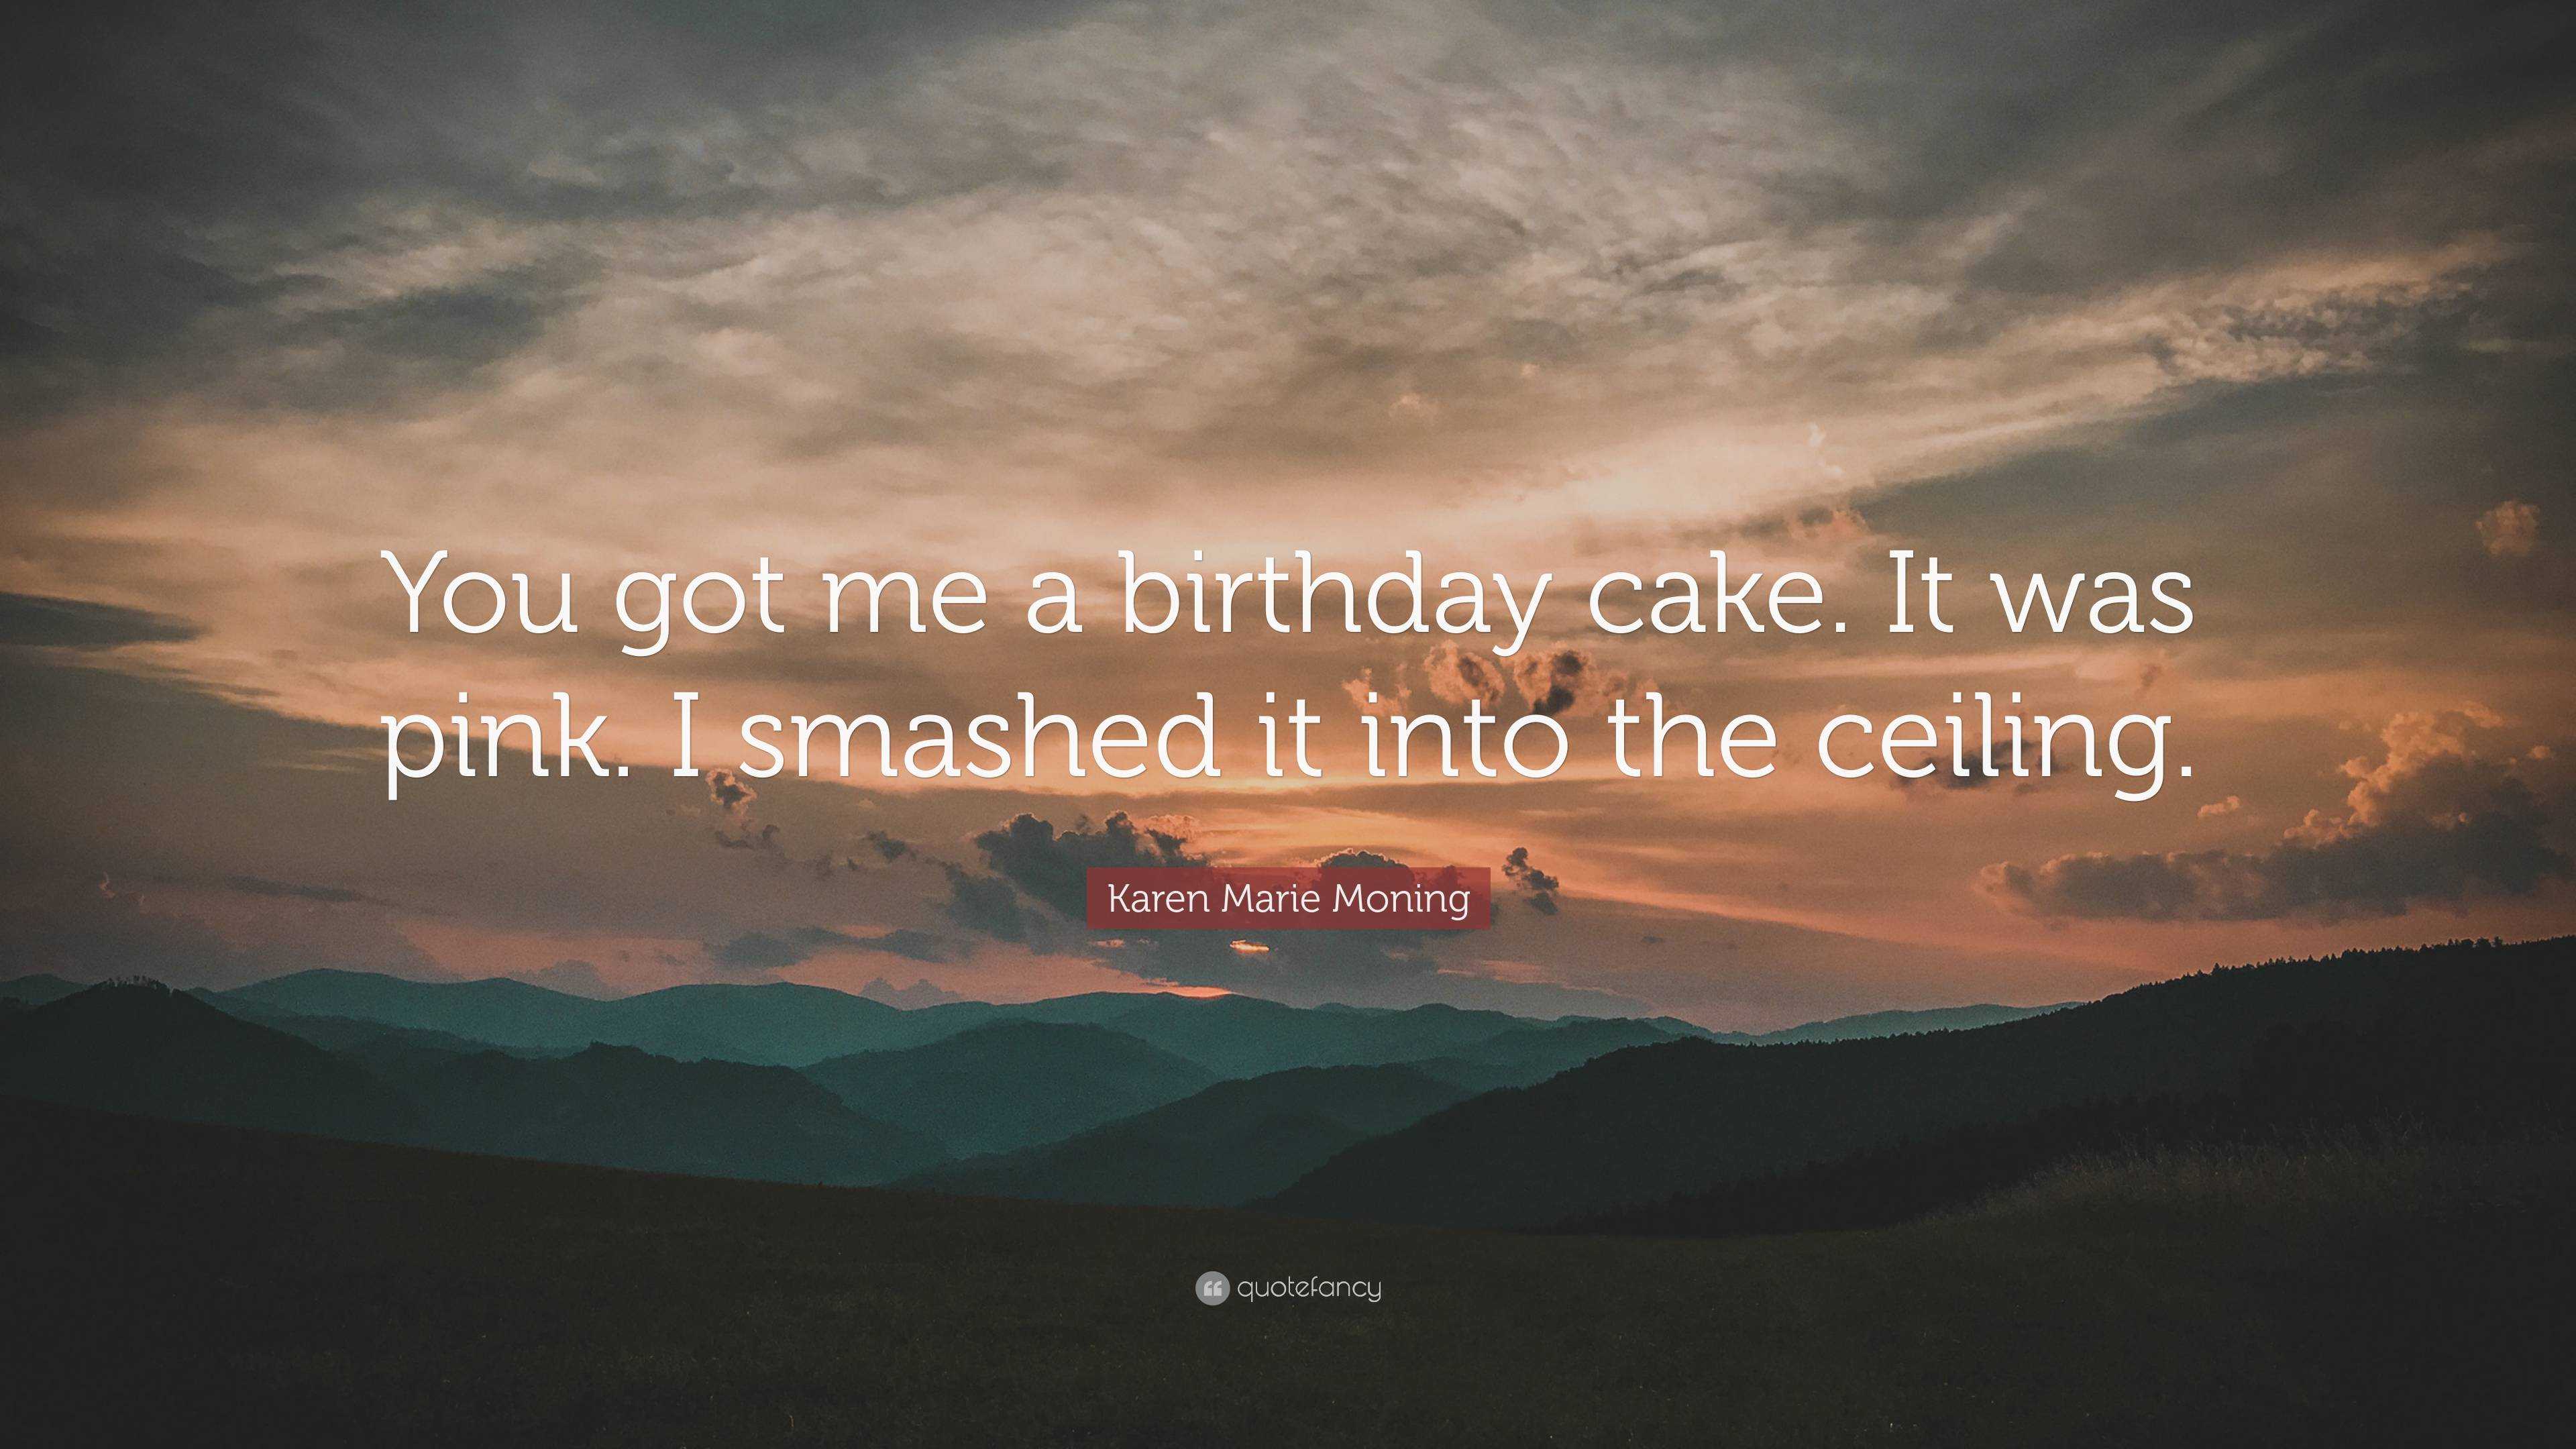 Liam Payne Quote: “I'd be a birthday cake!”